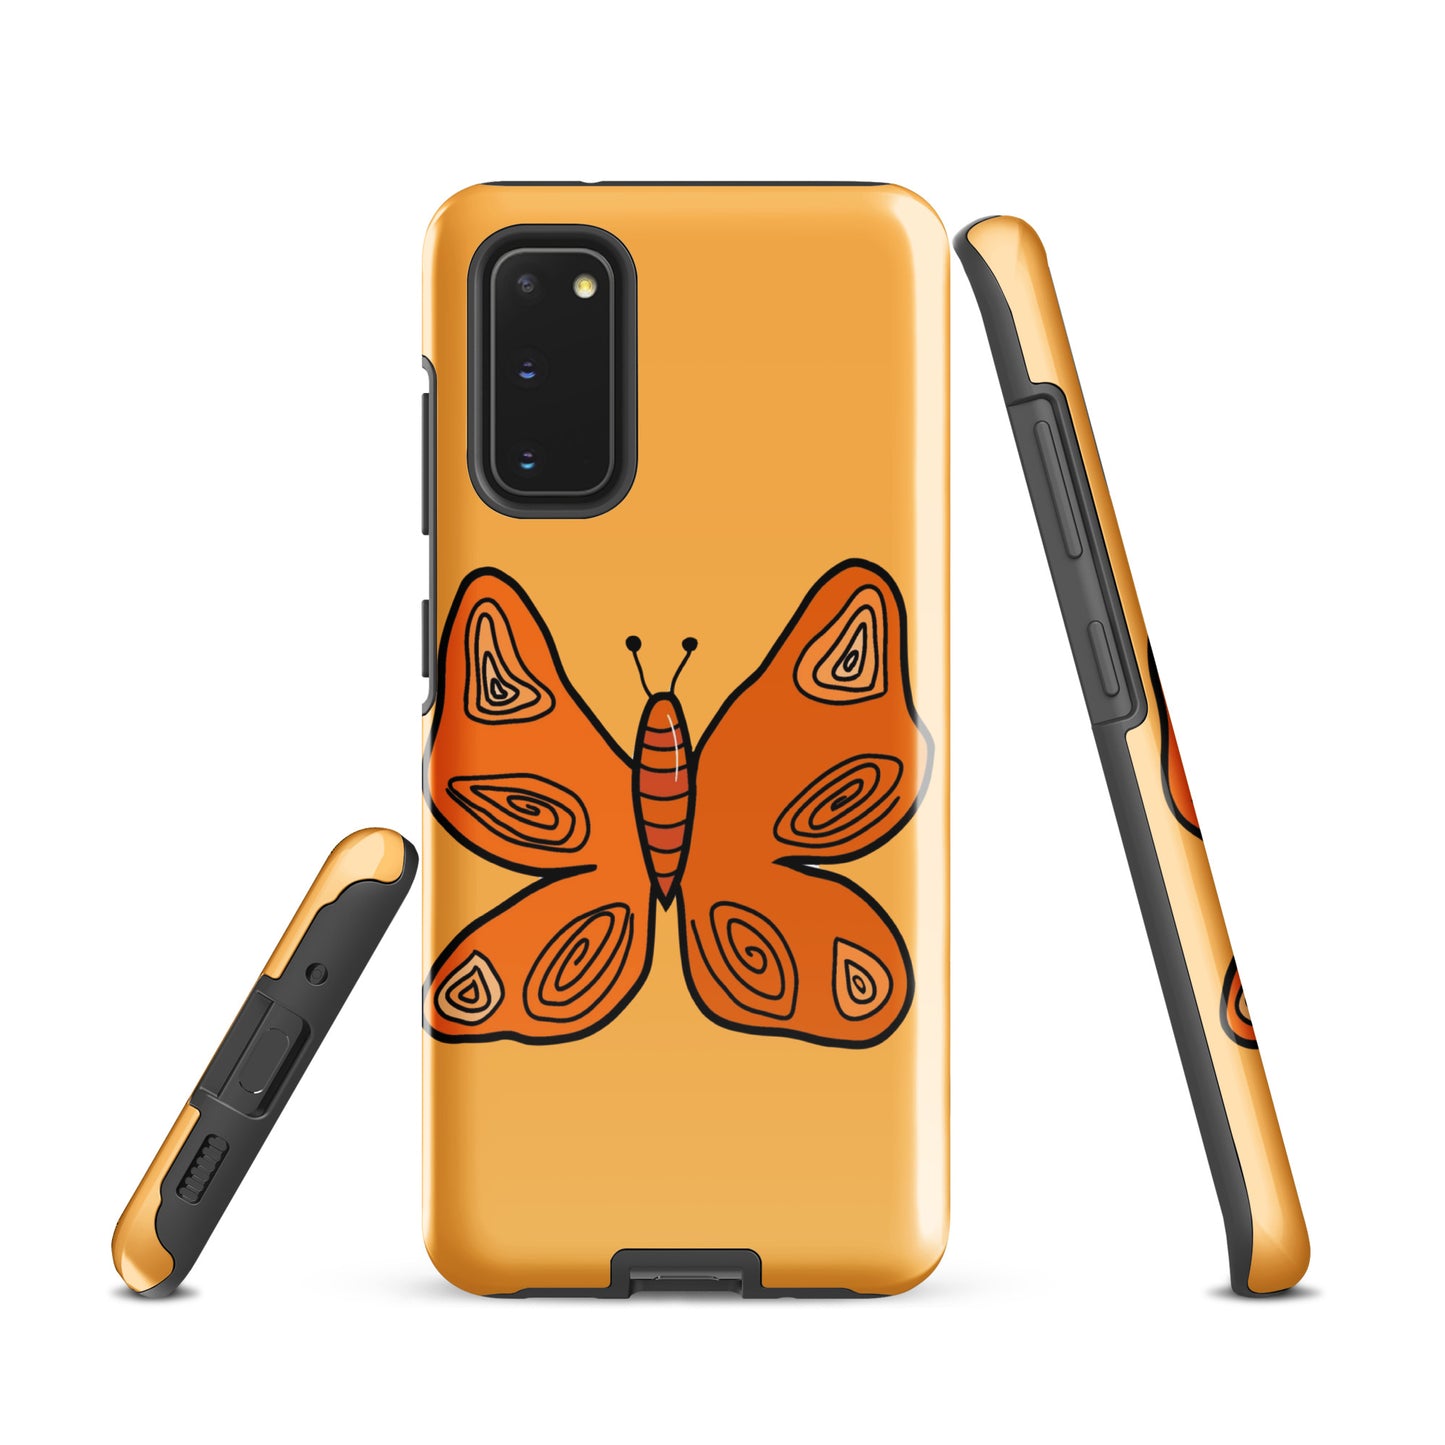 An Orange Butterfly Case for the Samsung Galaxy S20 